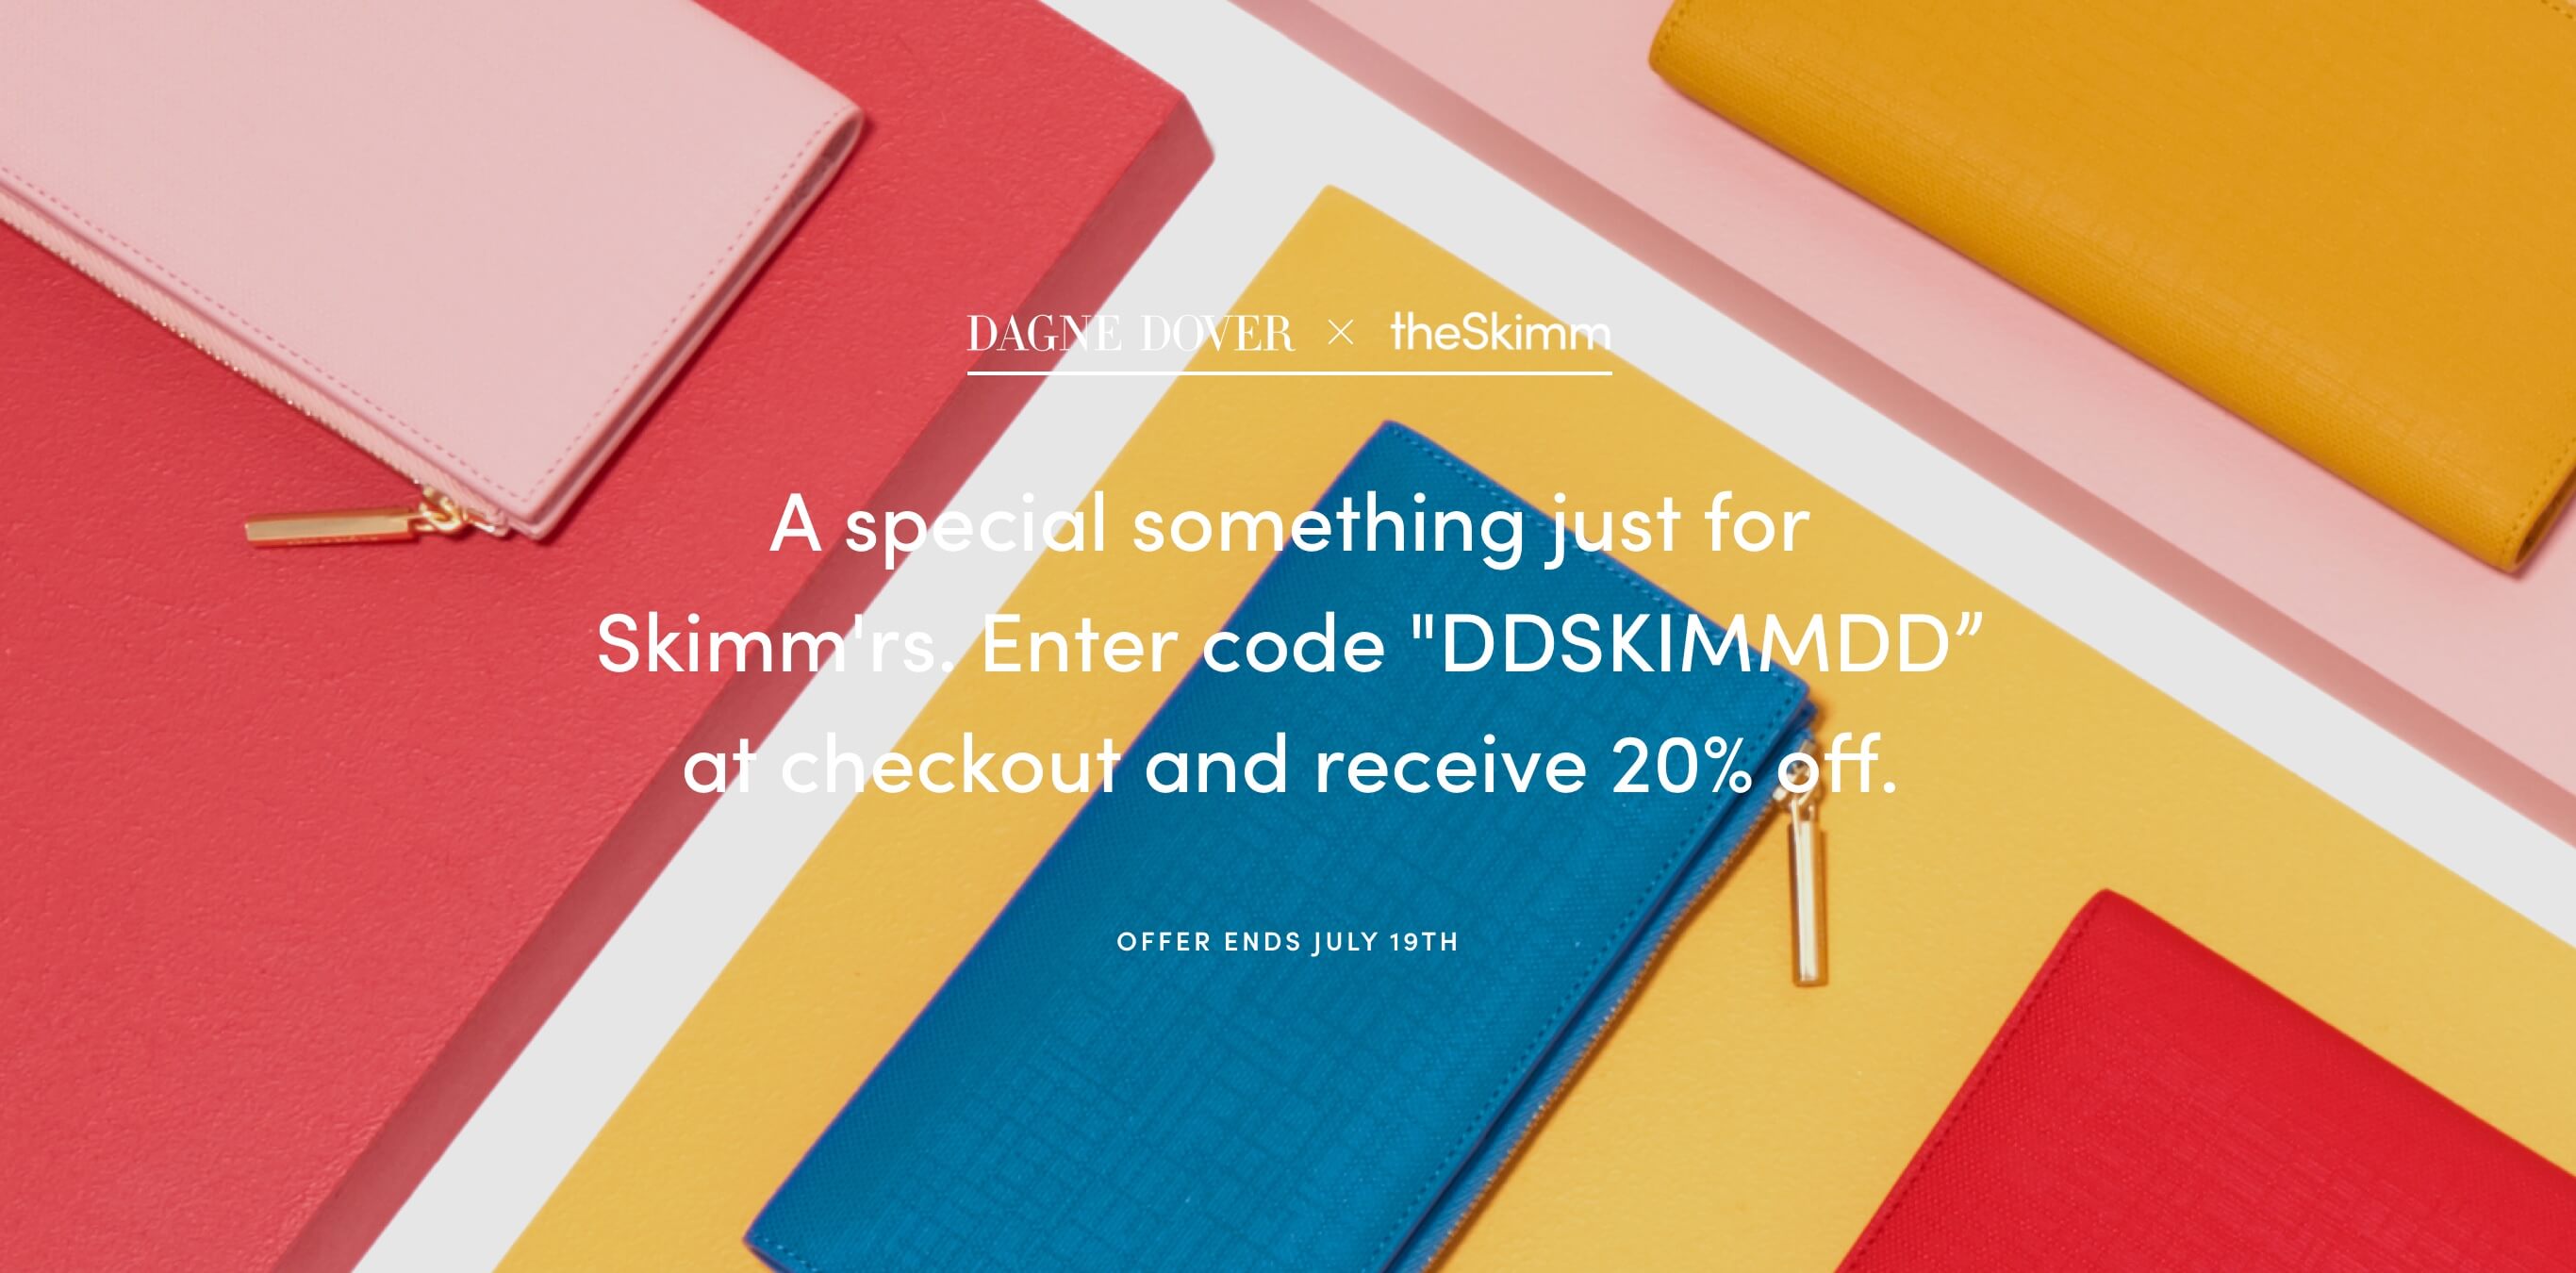 Dagne Dover X theSkimm: A special something just for Skimm'rs.